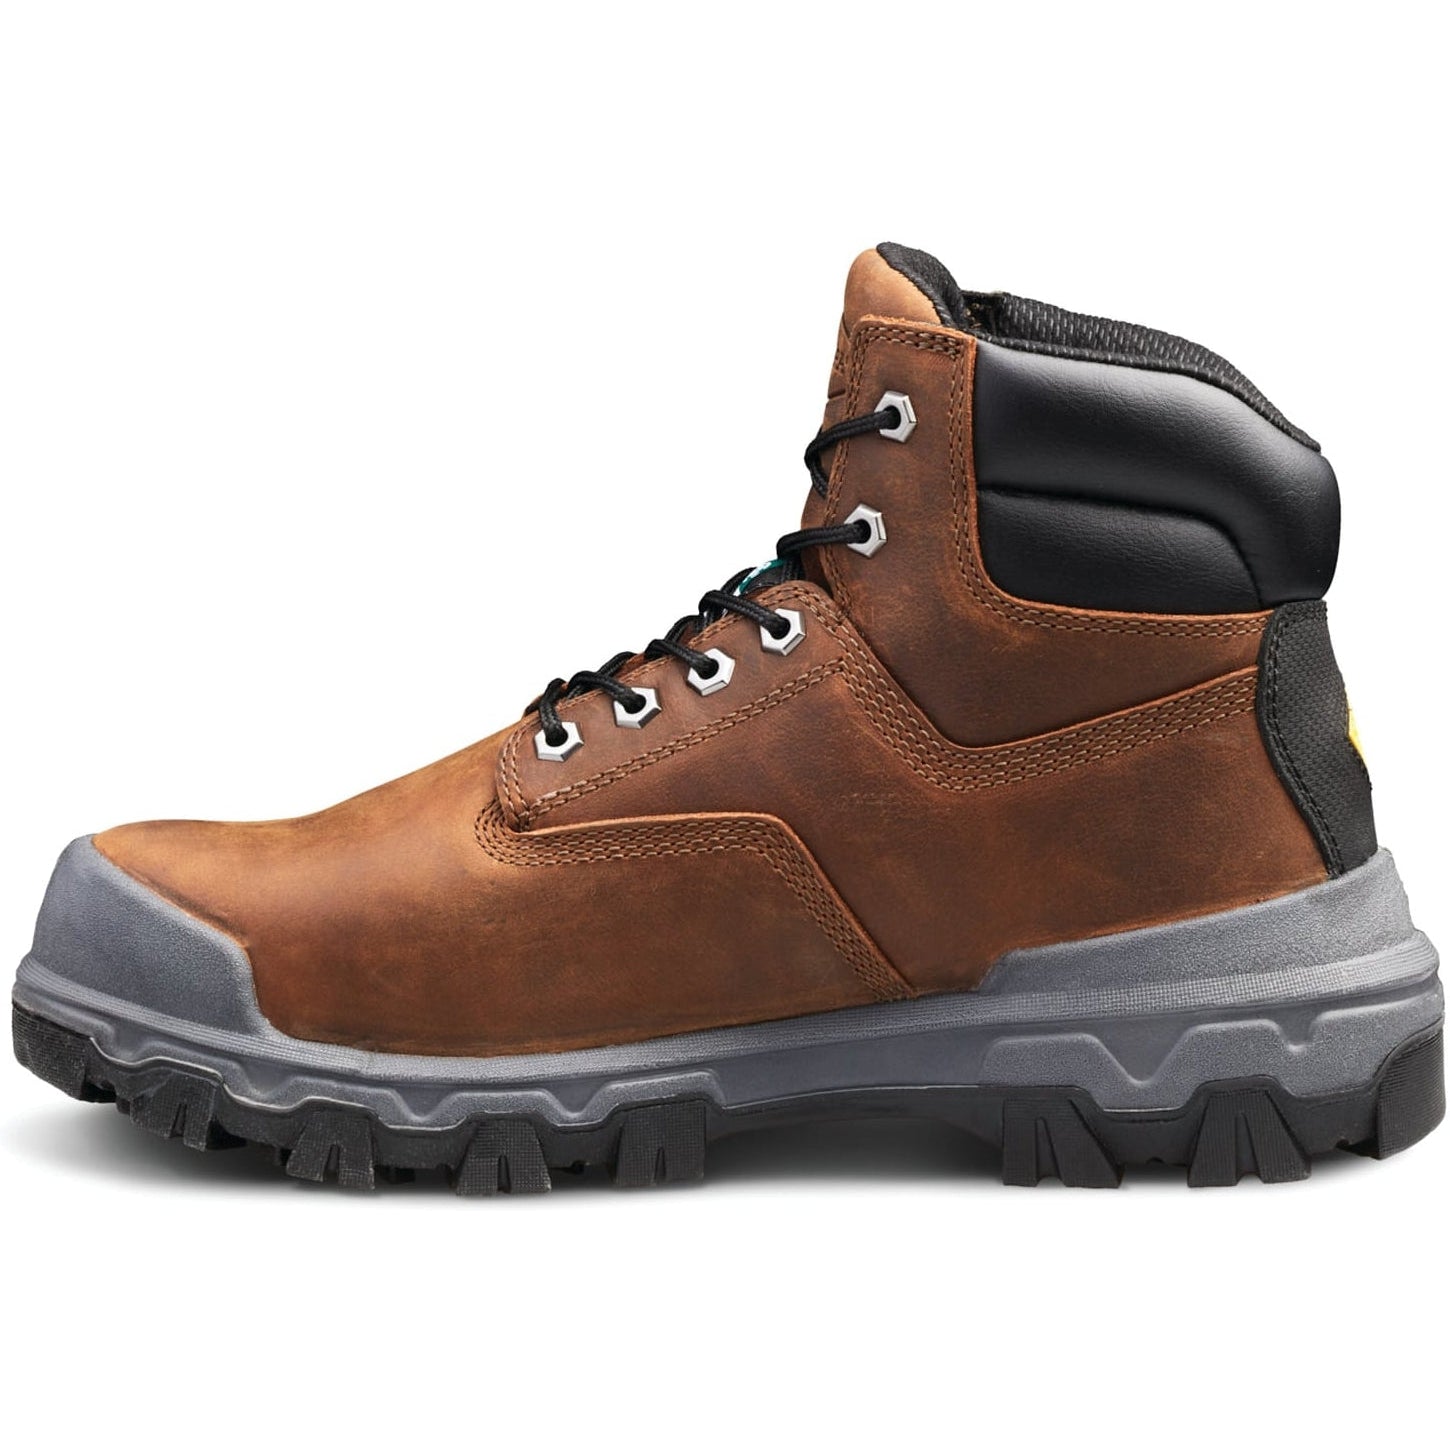 Terra Men's Sentry 2020 6" Comp Toe WP Safety Work Boot -Brown- R4NWBN  - Overlook Boots